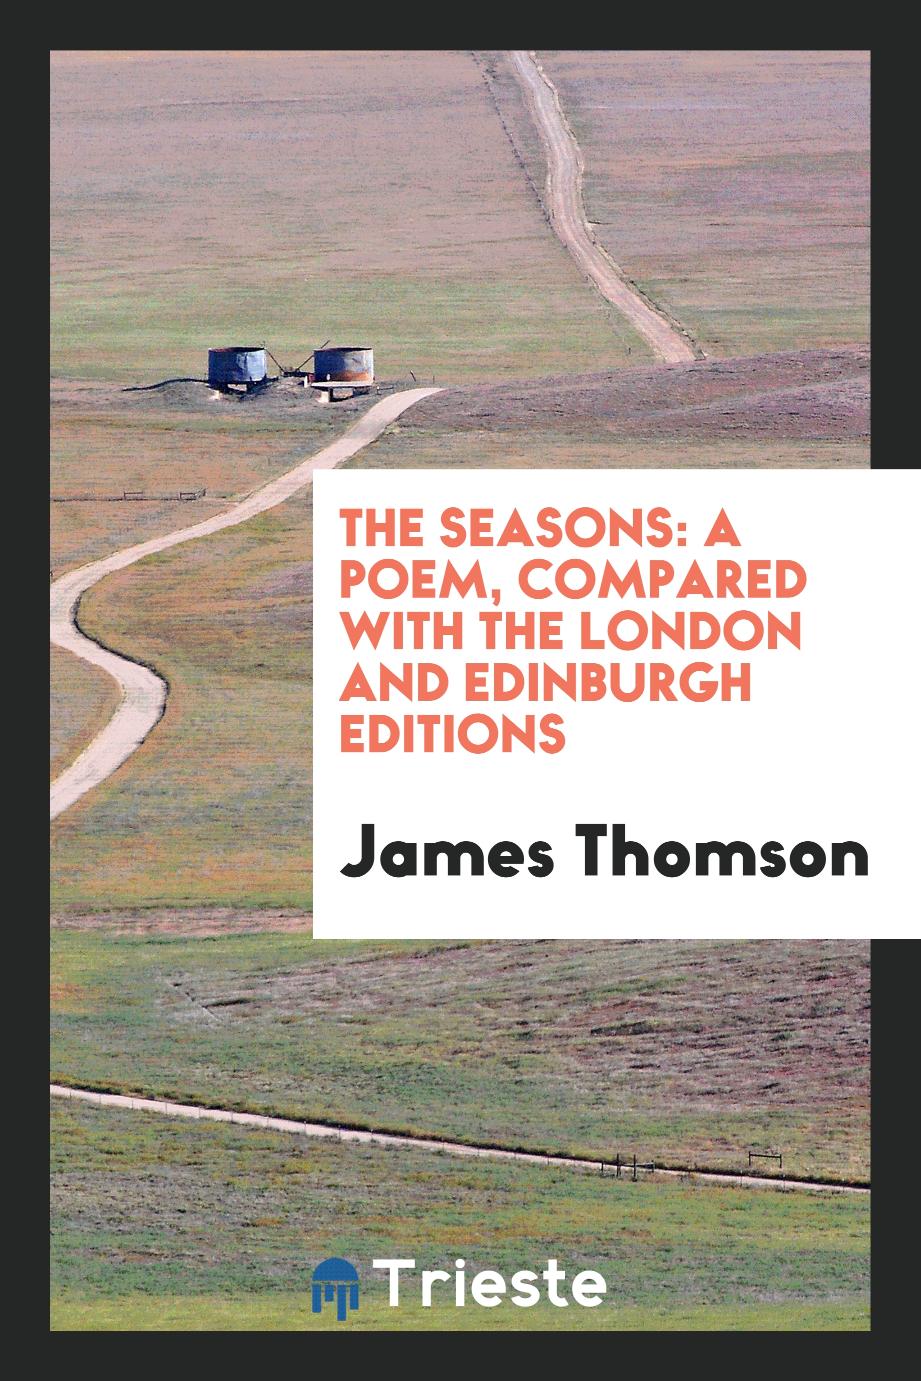 The Seasons: A Poem, Compared with the London and Edinburgh Editions